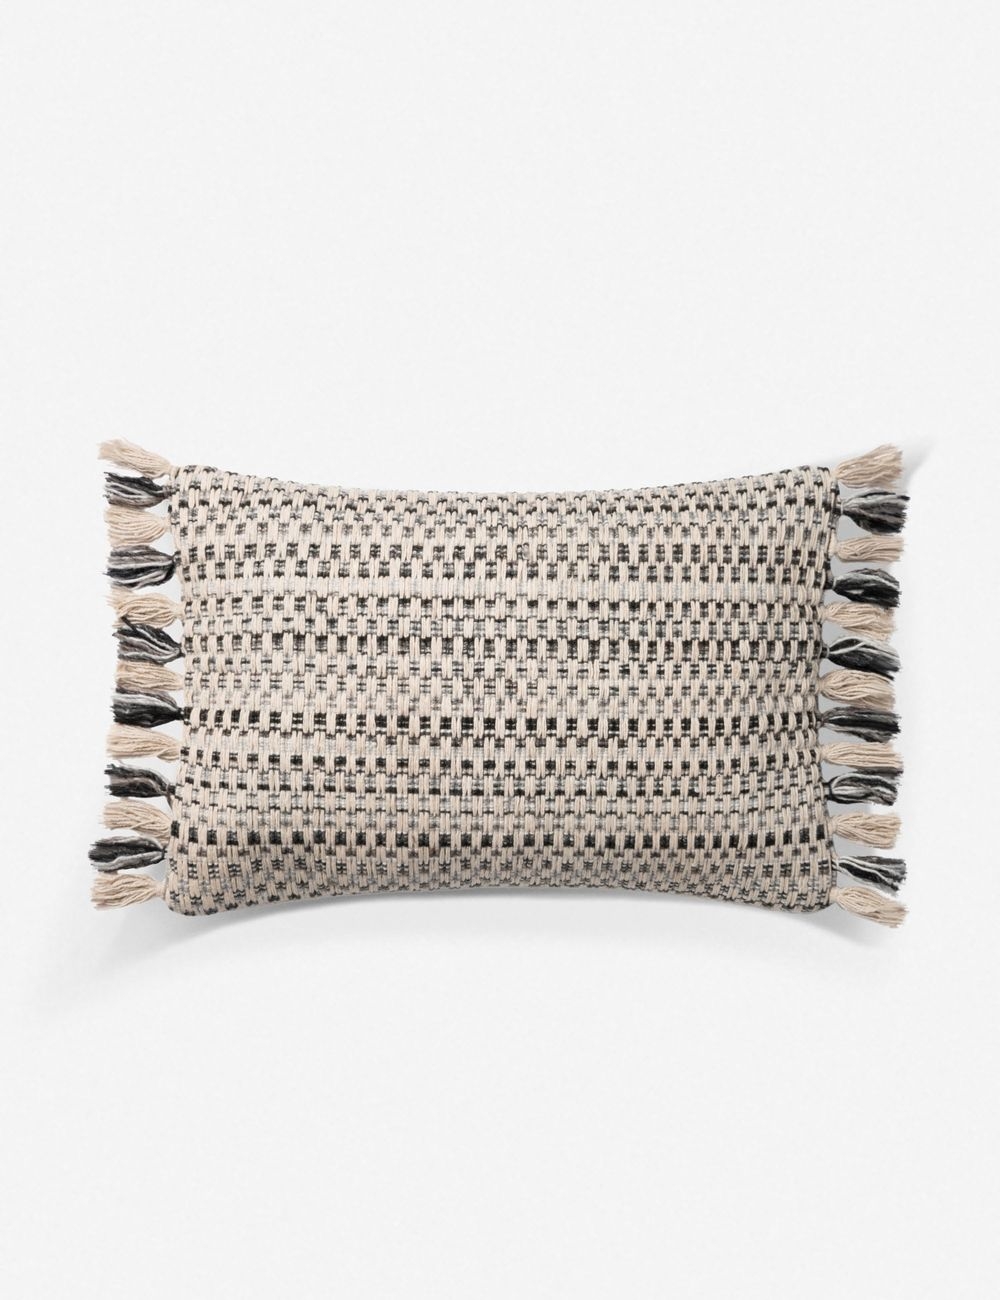 Evry Lumbar Pillow, Natural and Black, ED Ellen DeGeneres Crafted by Loloi - Image 0